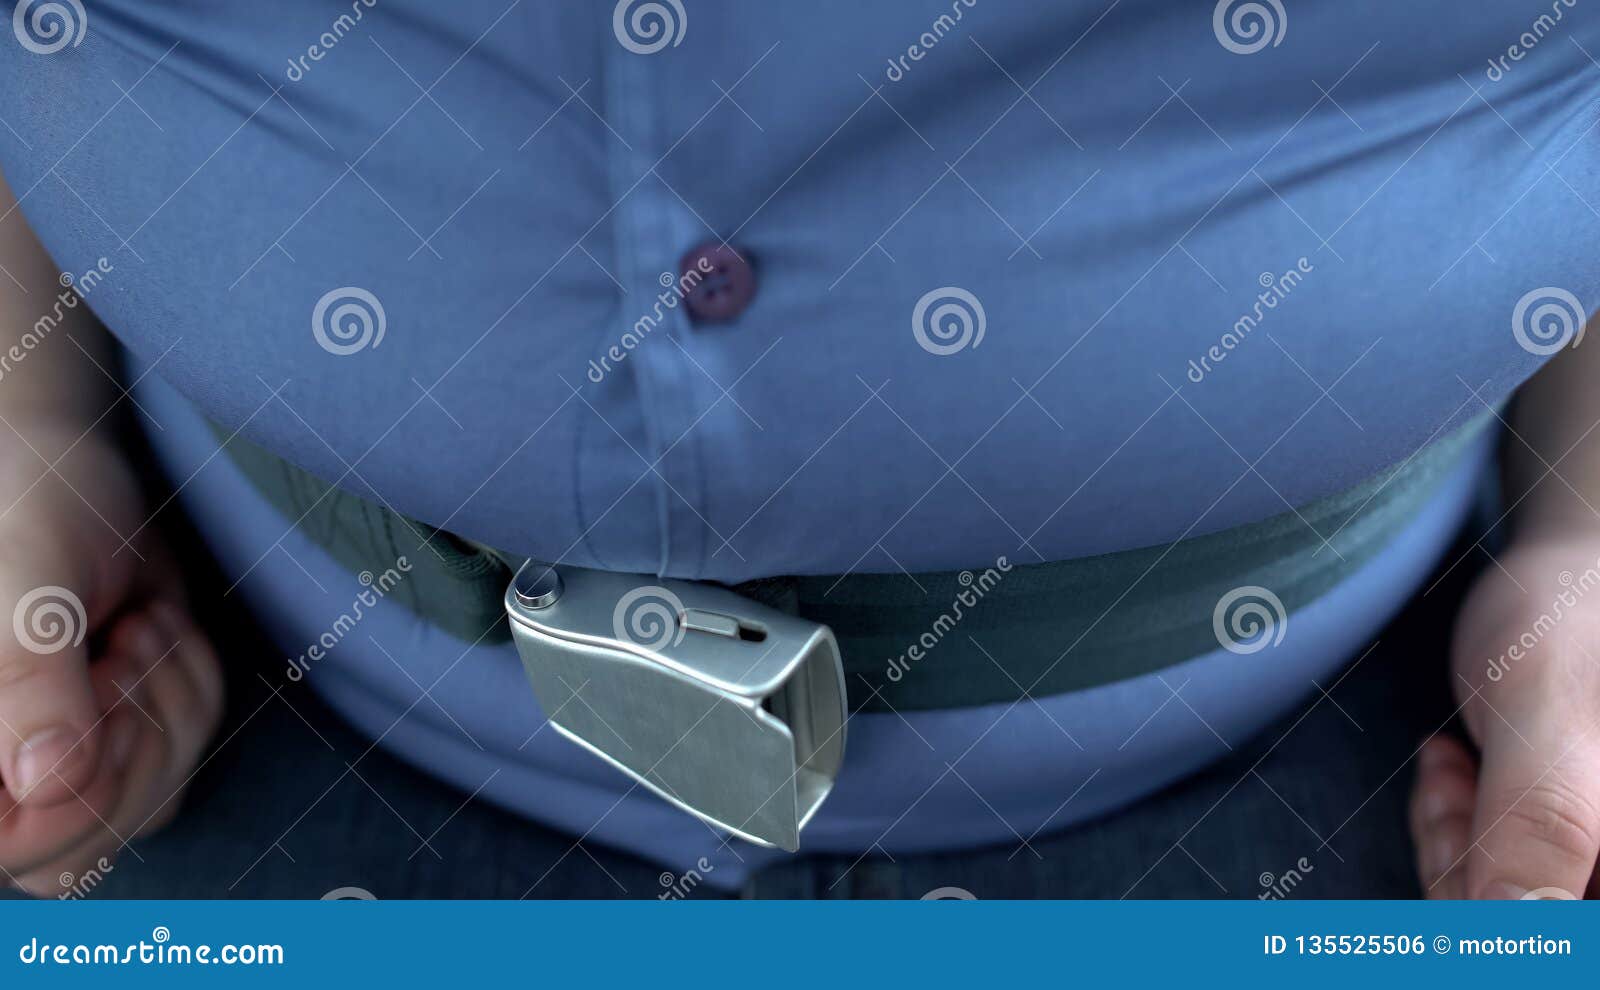 fat belly man hardly fastens safety belt, genetic predisposition, weight loss